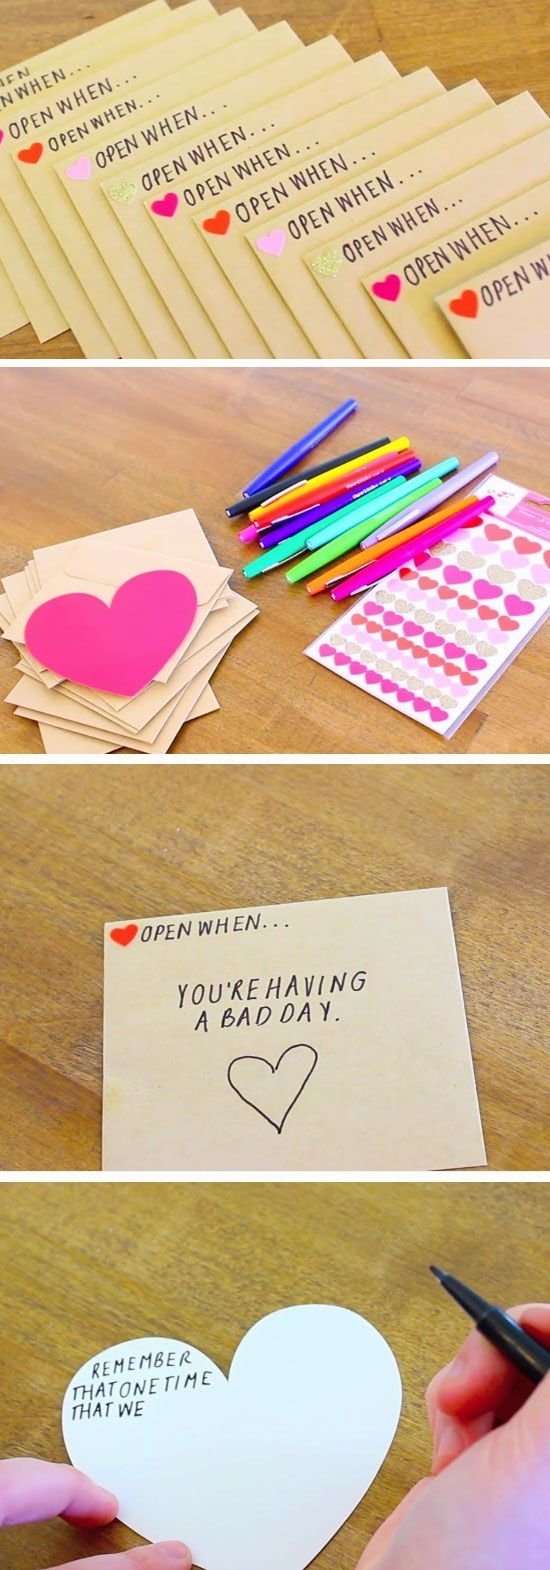 10 Elegant Homemade Valentines Day Ideas For Boyfriend 45 awesome diy gifts for boyfriend with lots of tutorials 2017 3 2022